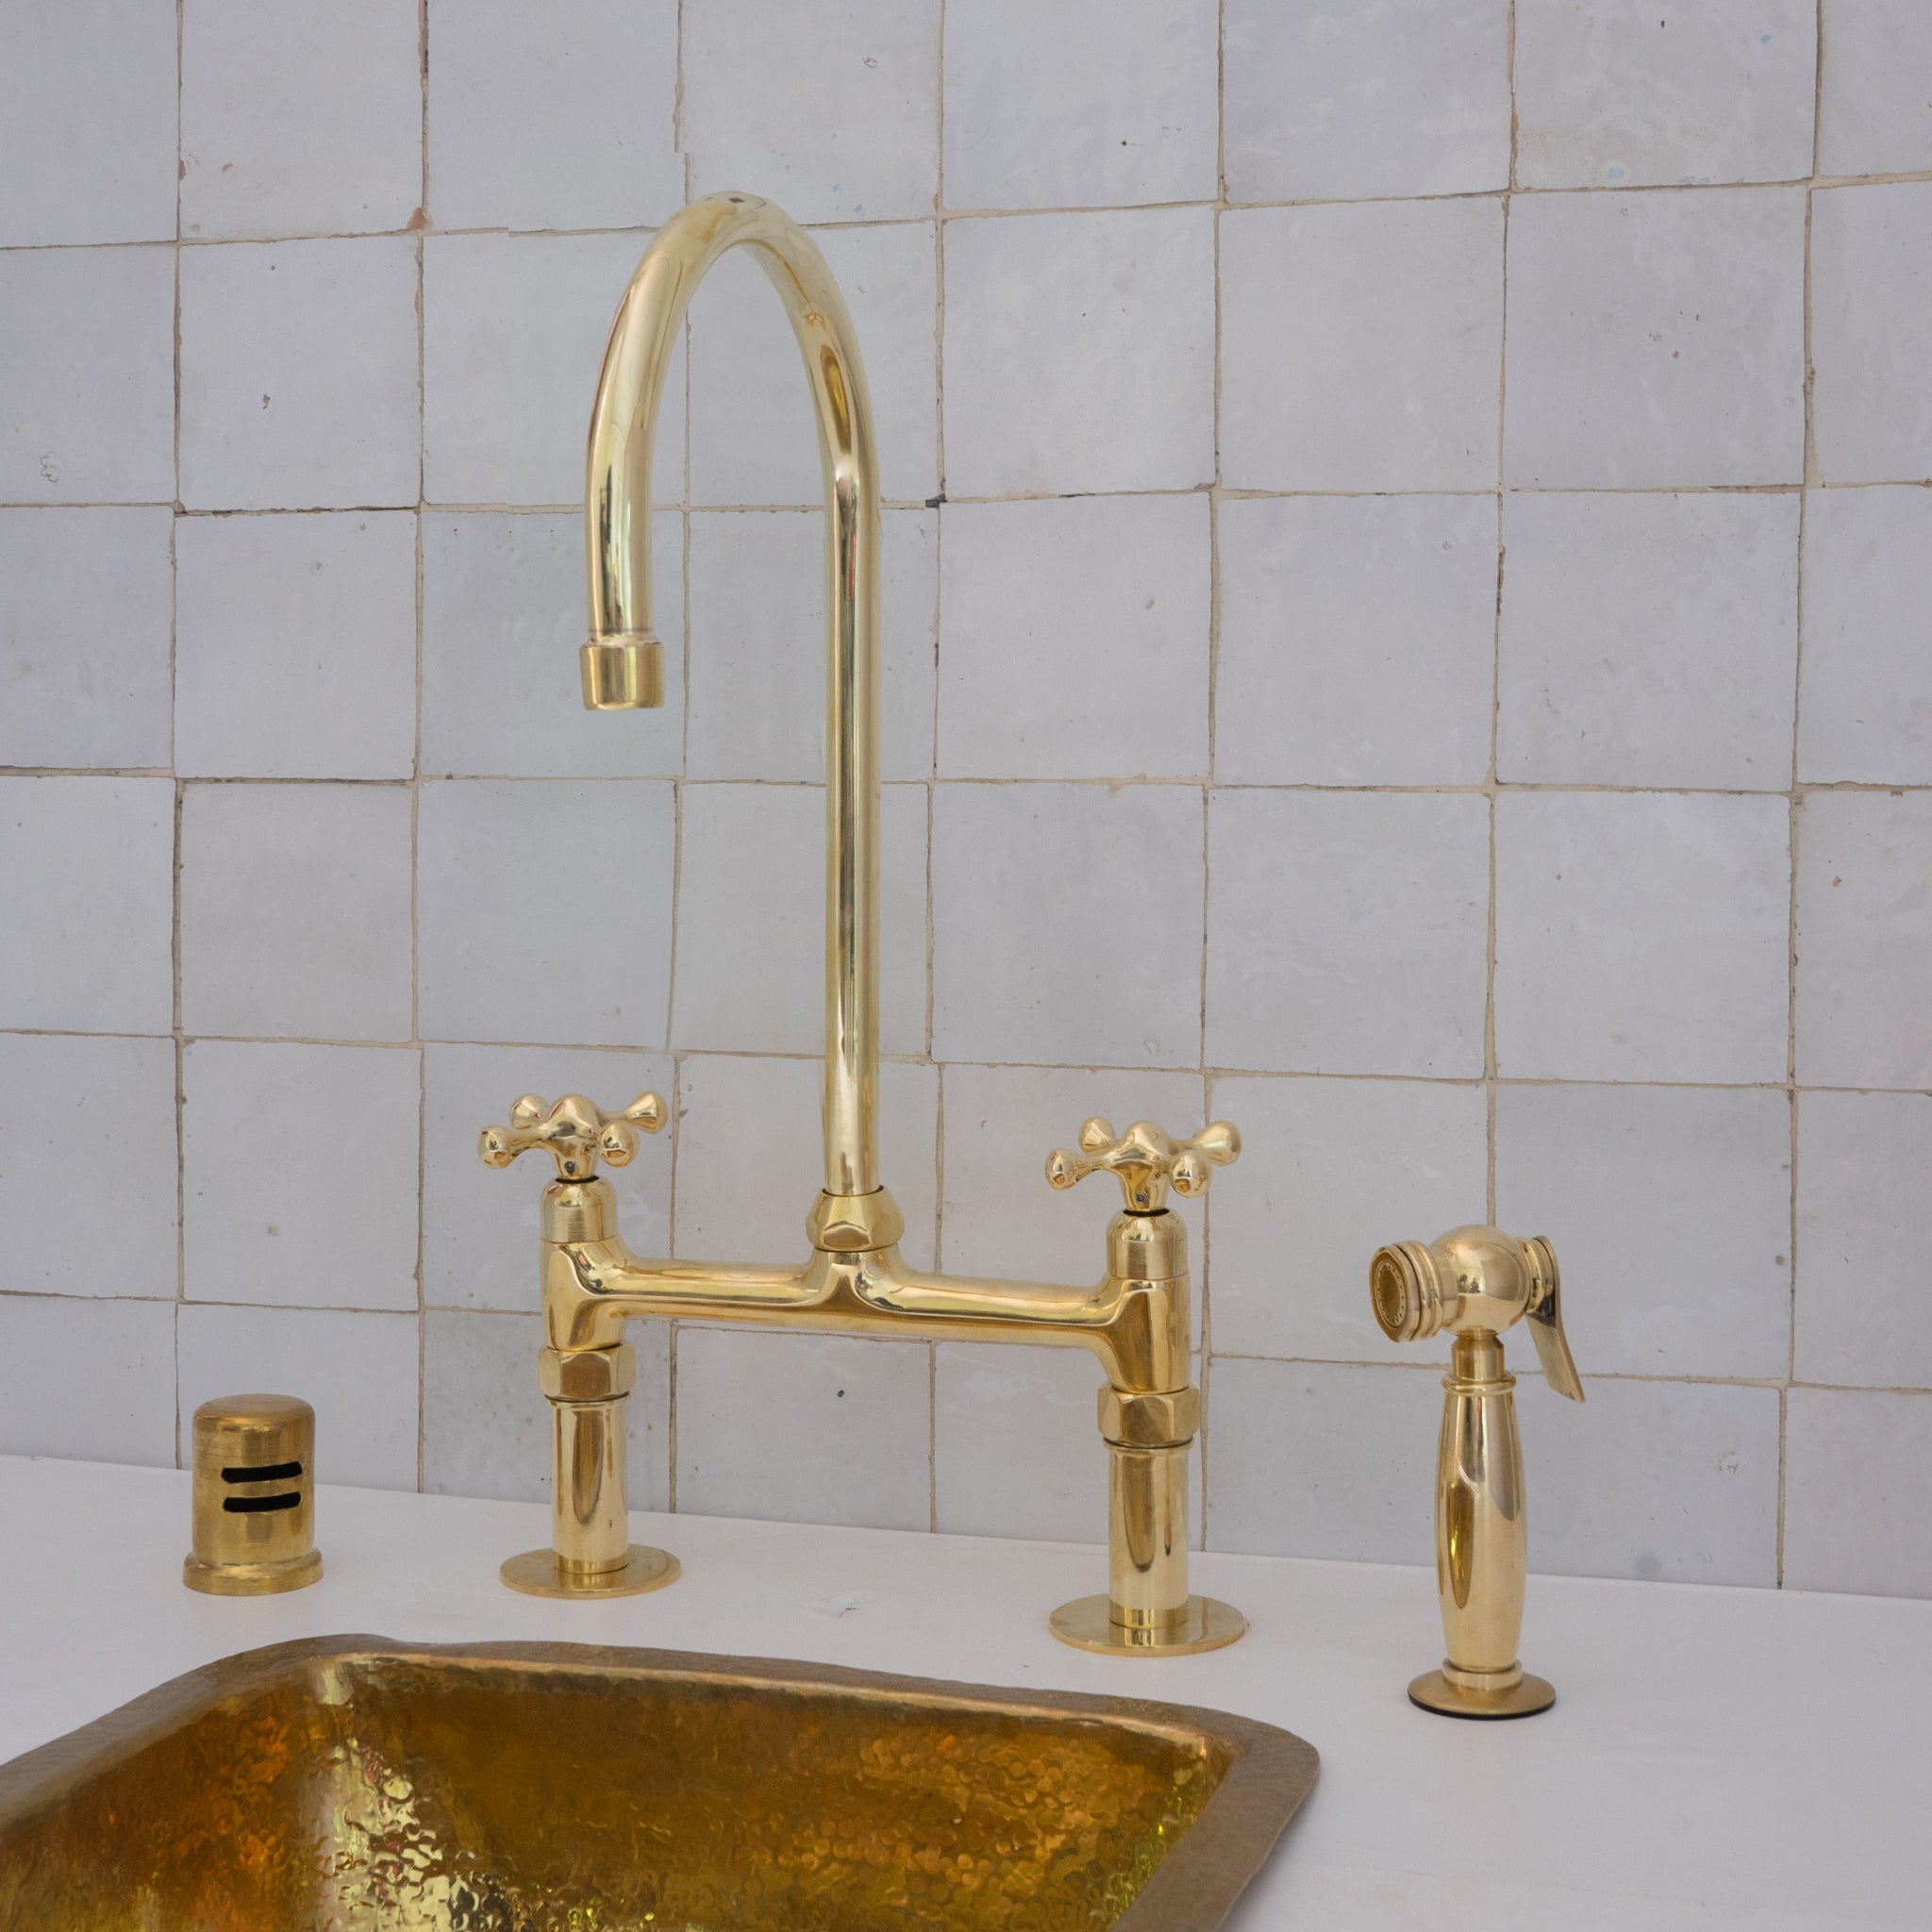 Bronze or Brass; What's the difference? – Tap Refurbishment